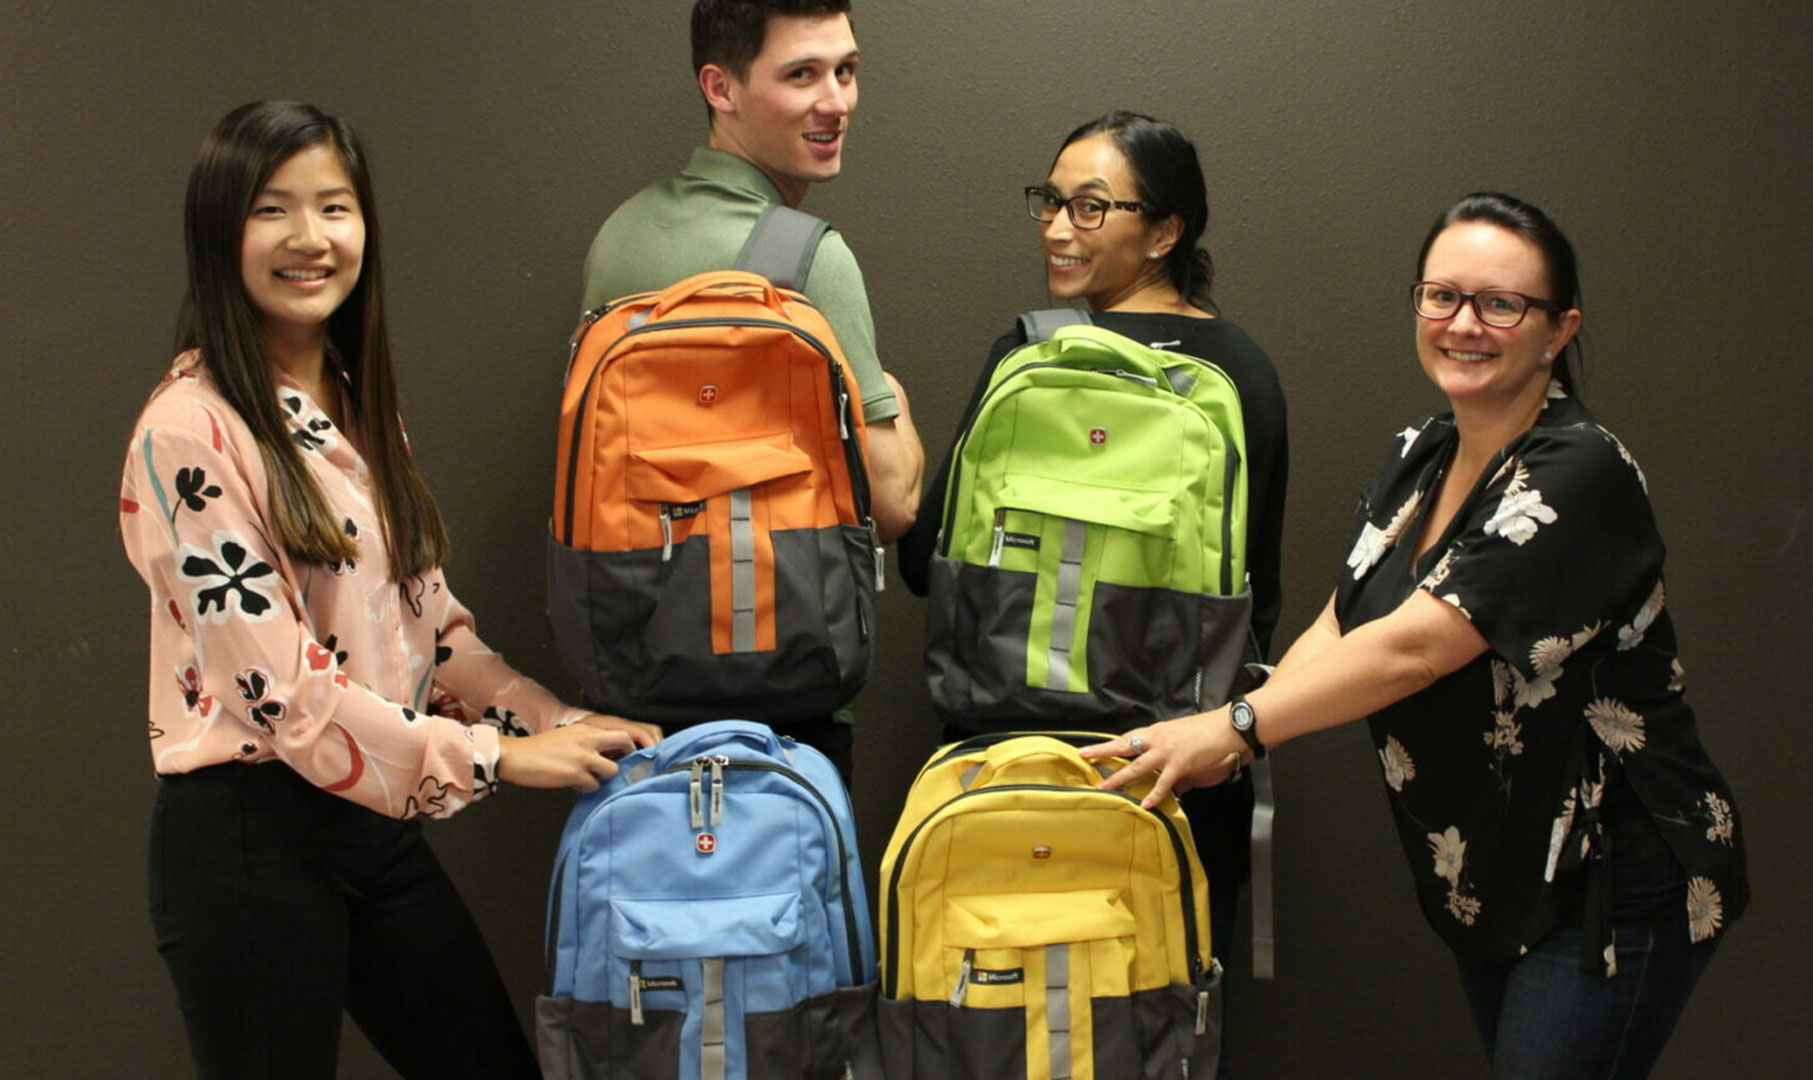 Image of four people holding custom colored backpacks in orange, green, blue and yellow.